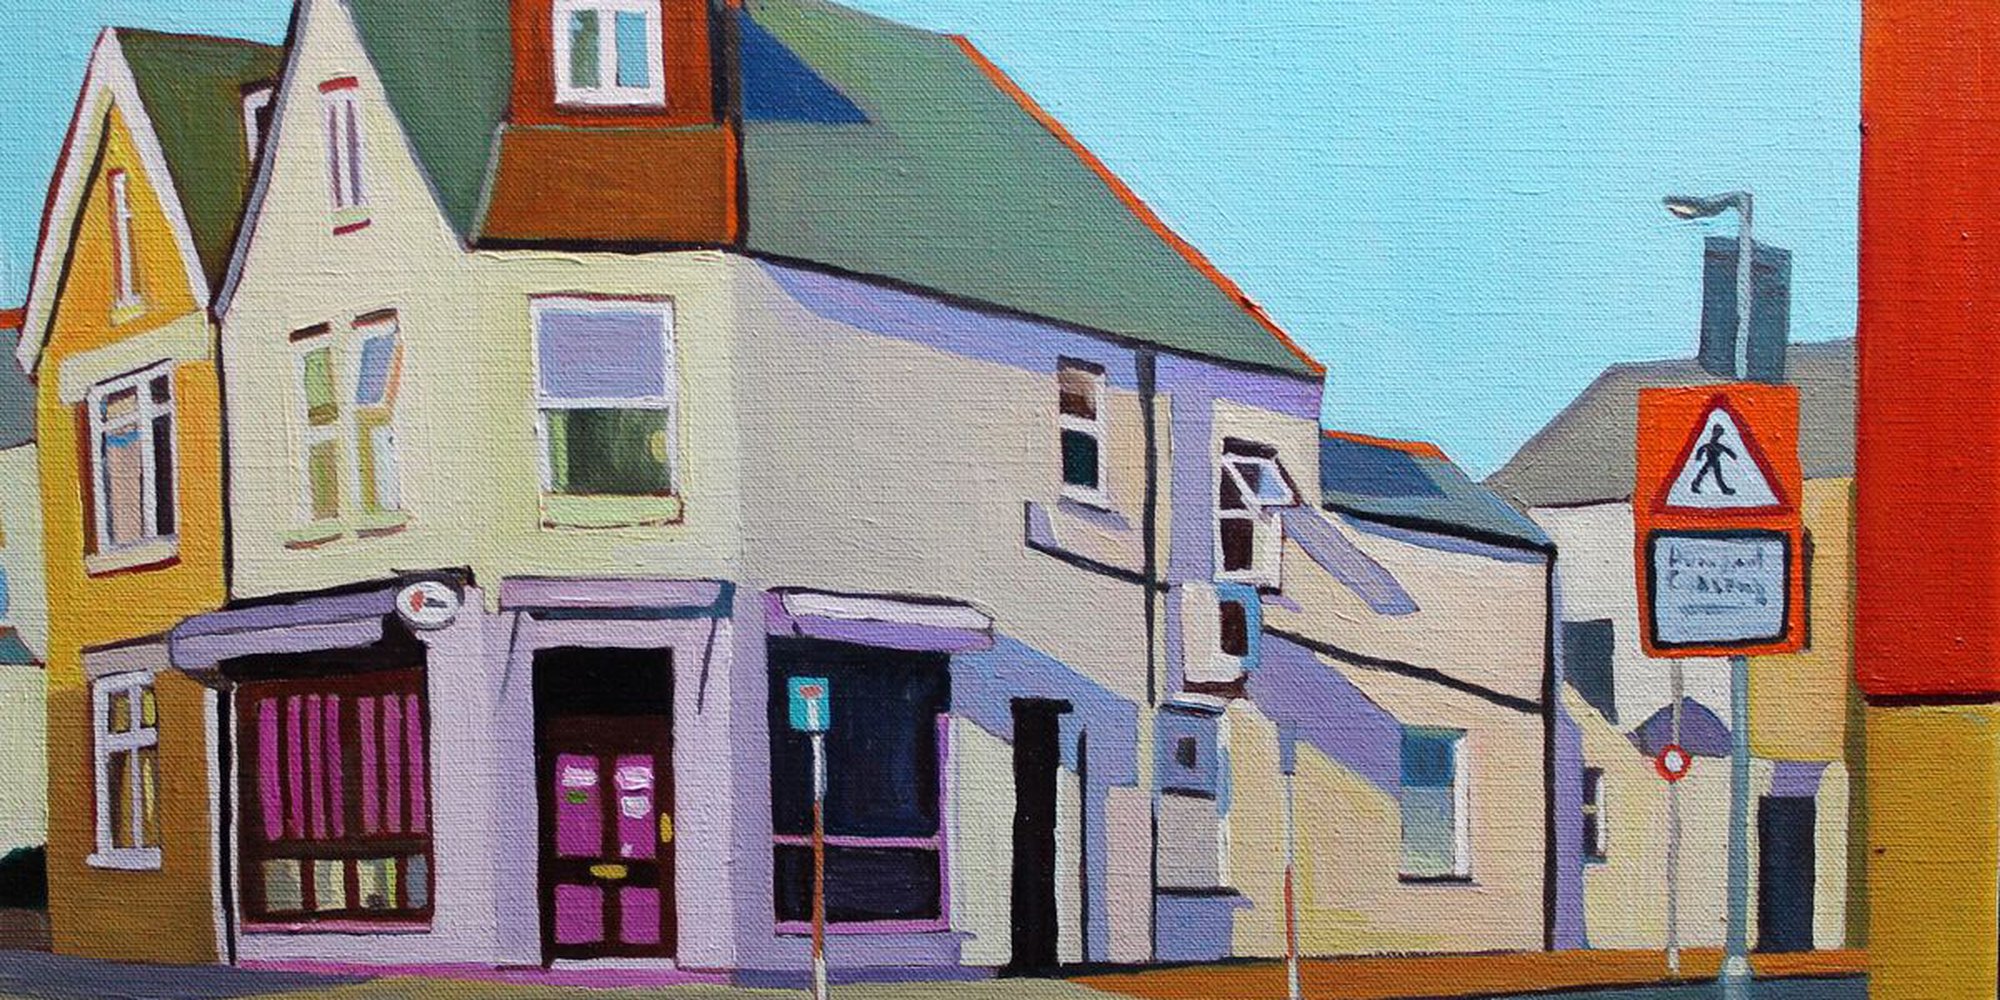 Art of the Day: "Salisbury Road, Cardiff, 2017" by Emma Cownie